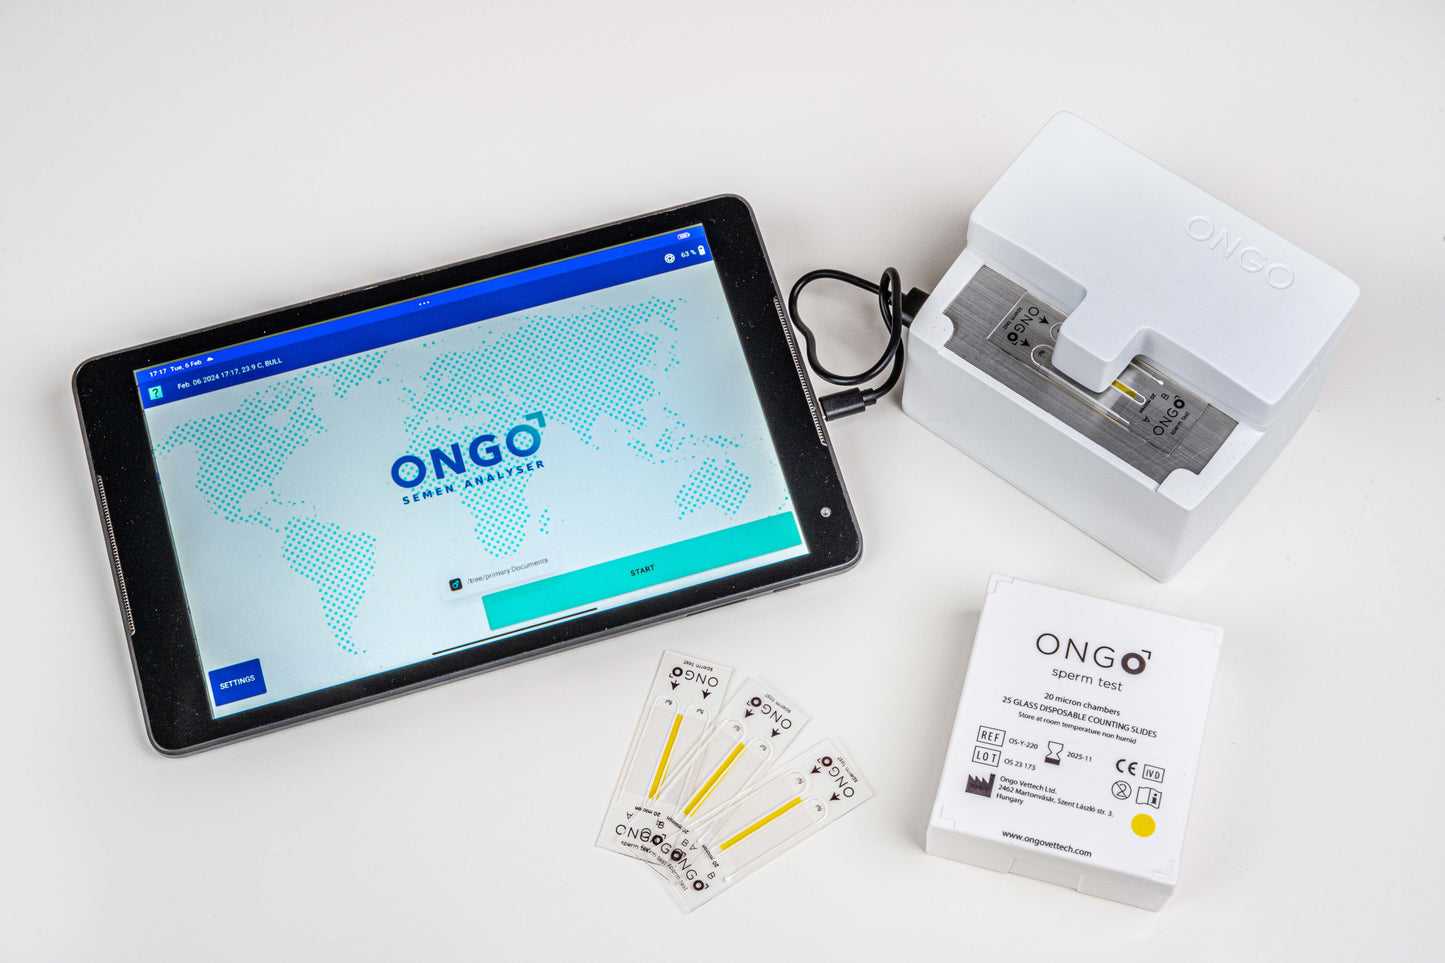 ONGO VISION - Starter Kit (Mobile Semen Analyzer with ONGO android application) with 30 DAYS MONEYBACK GUARANTEE